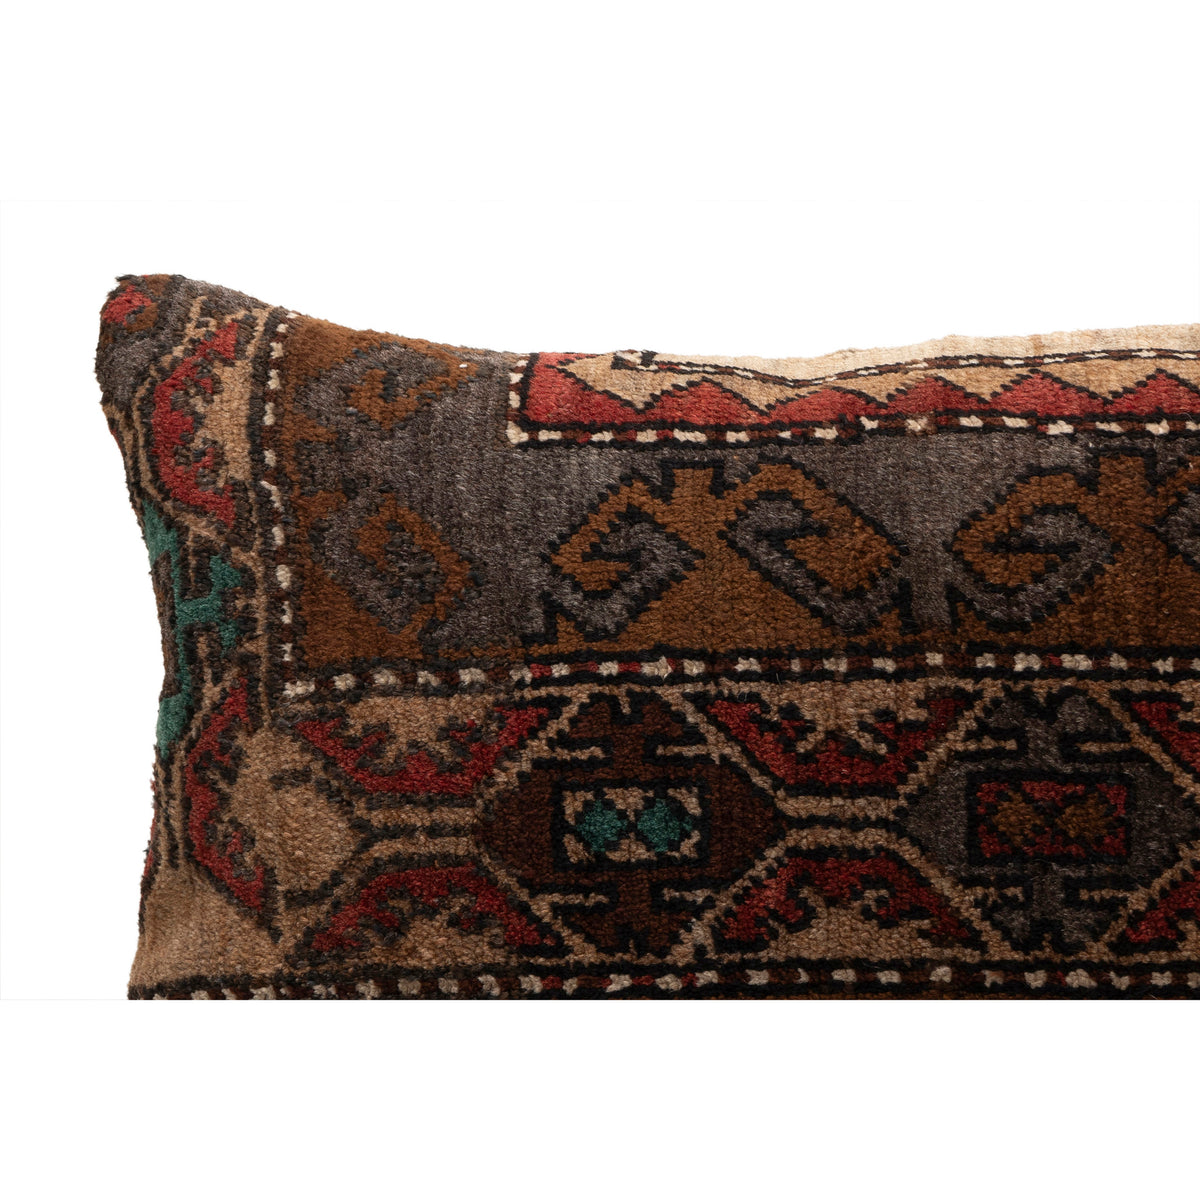 Handwoven Turkish Rug Pillow Cover 16" x 24"